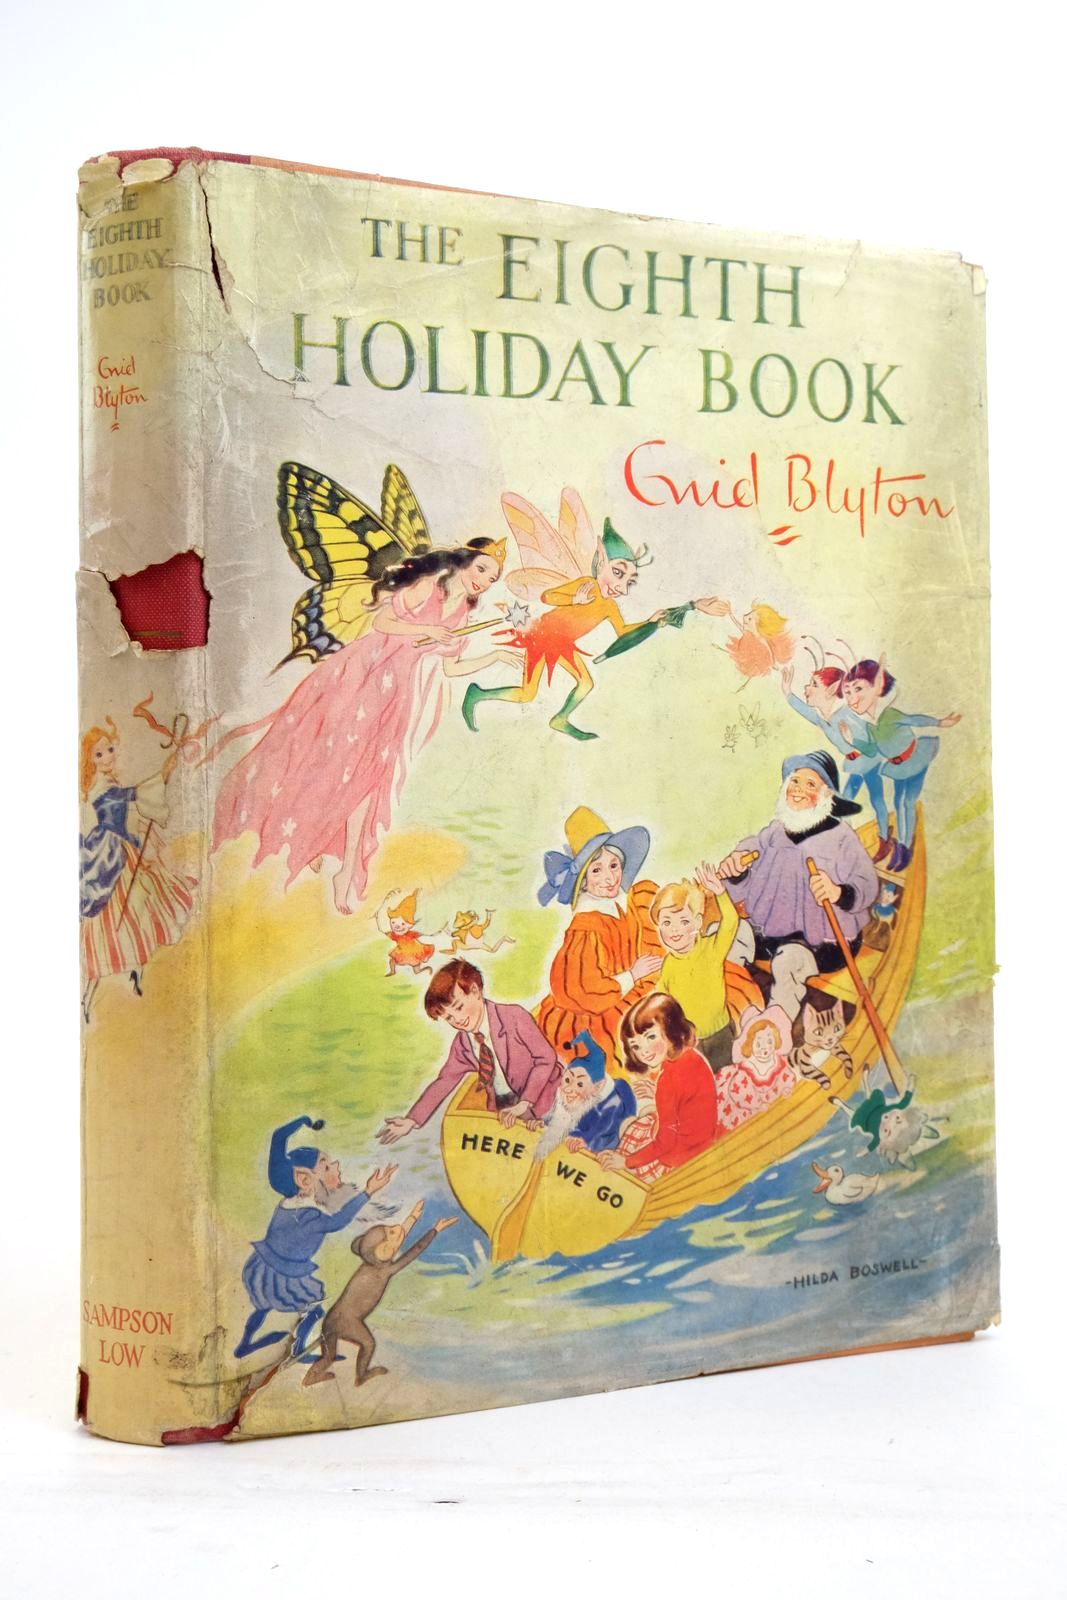 The Eighth Holiday Book